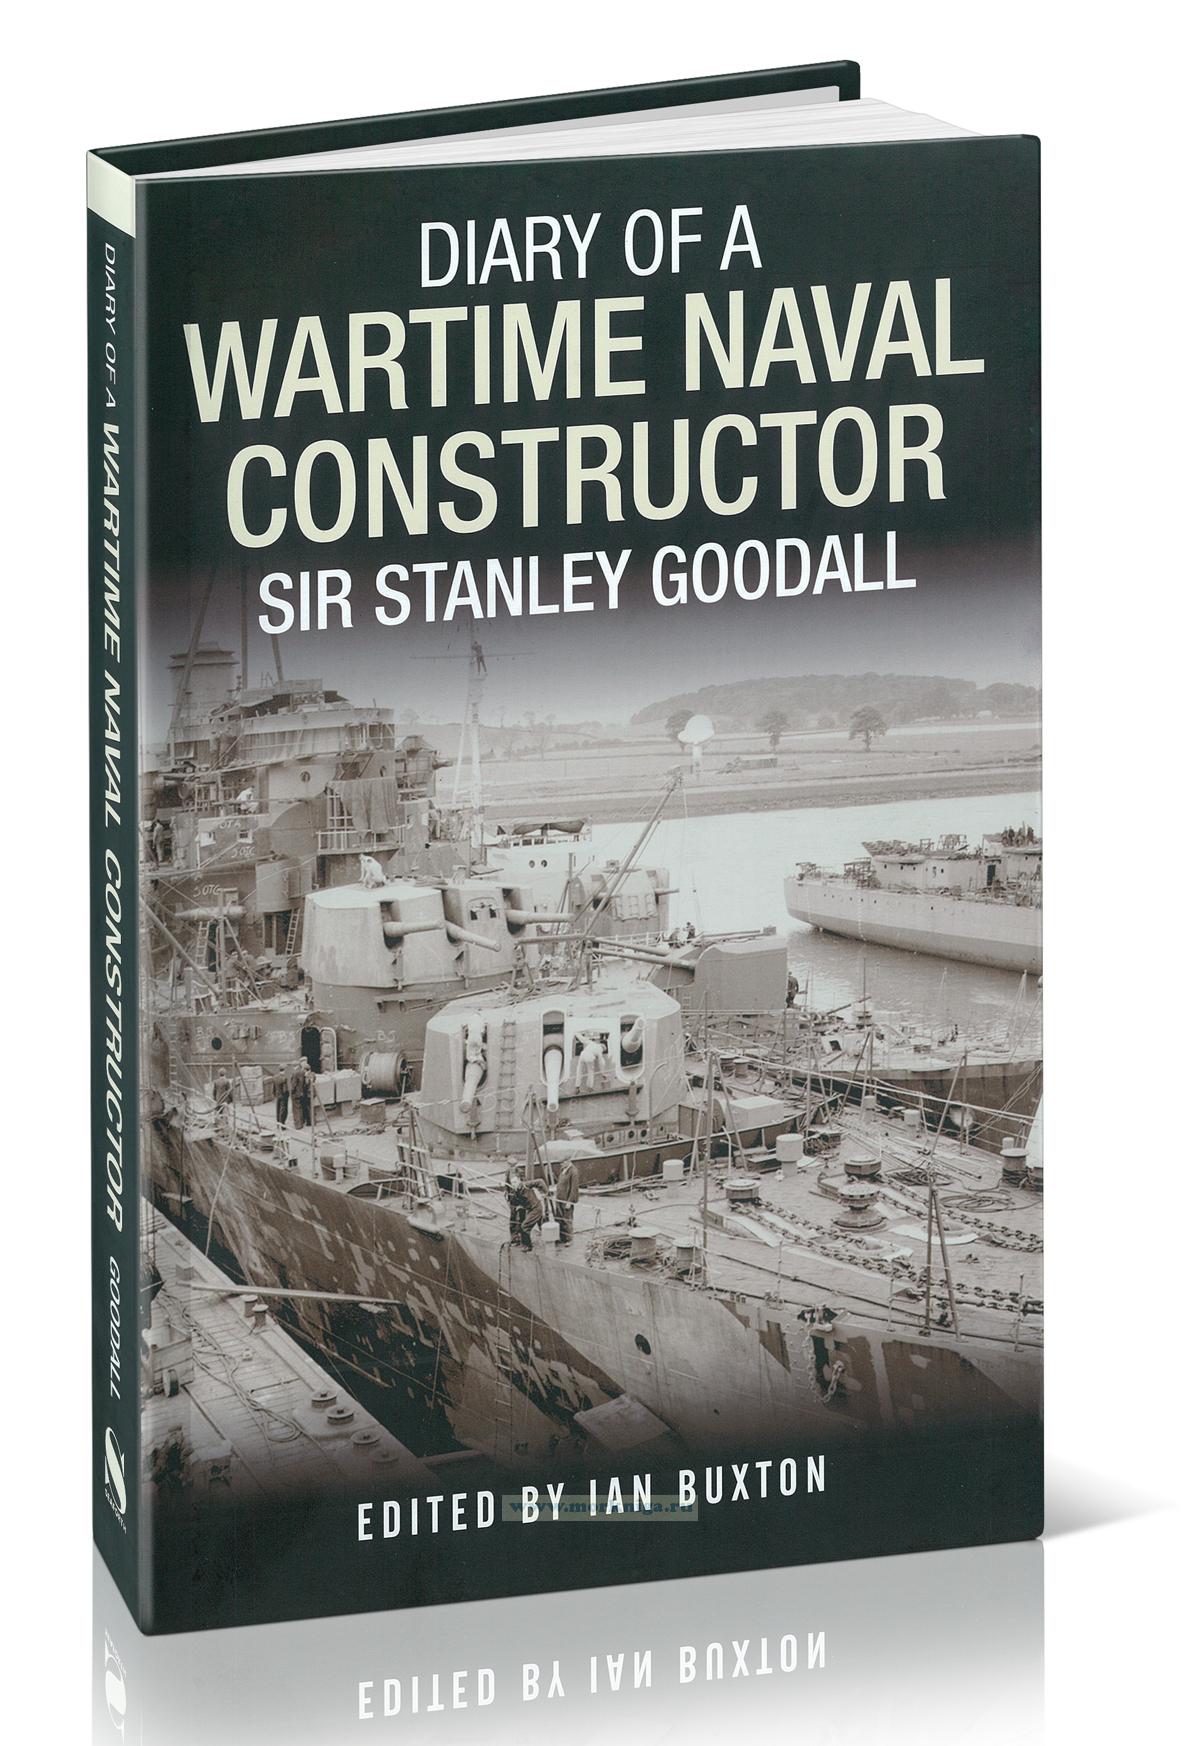 Diary of a Wartime Naval Constructor Sir Stanley Goodall